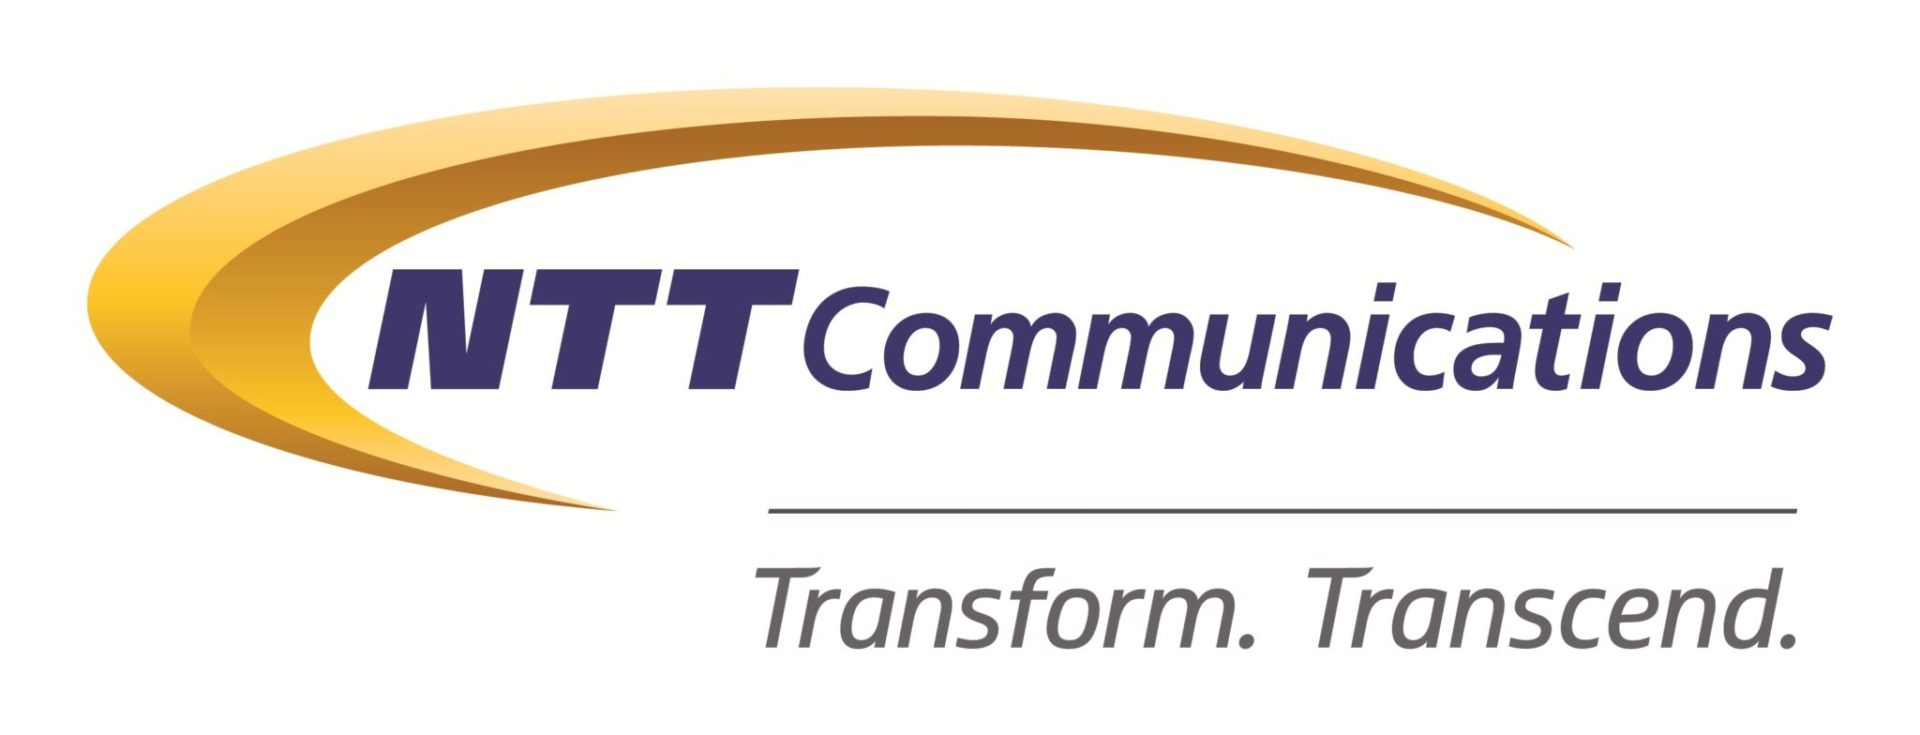 NTT Communications – UX Consulting and Agile Development for Enterprise Application (2015, HK)